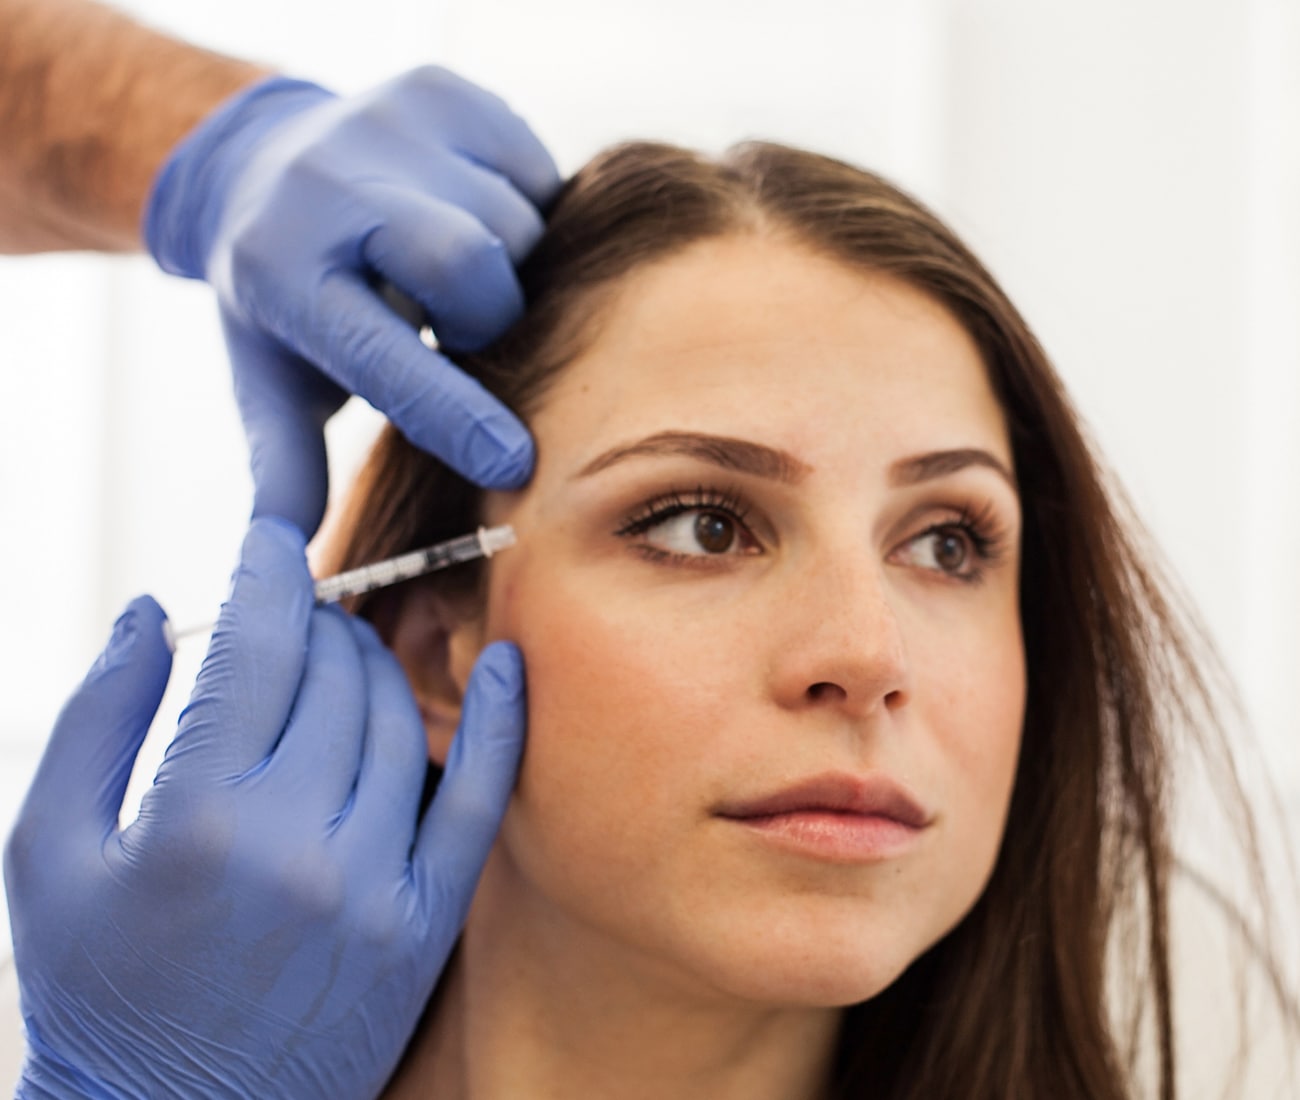 Woman Getting A Botox Injection Next To Her Eye